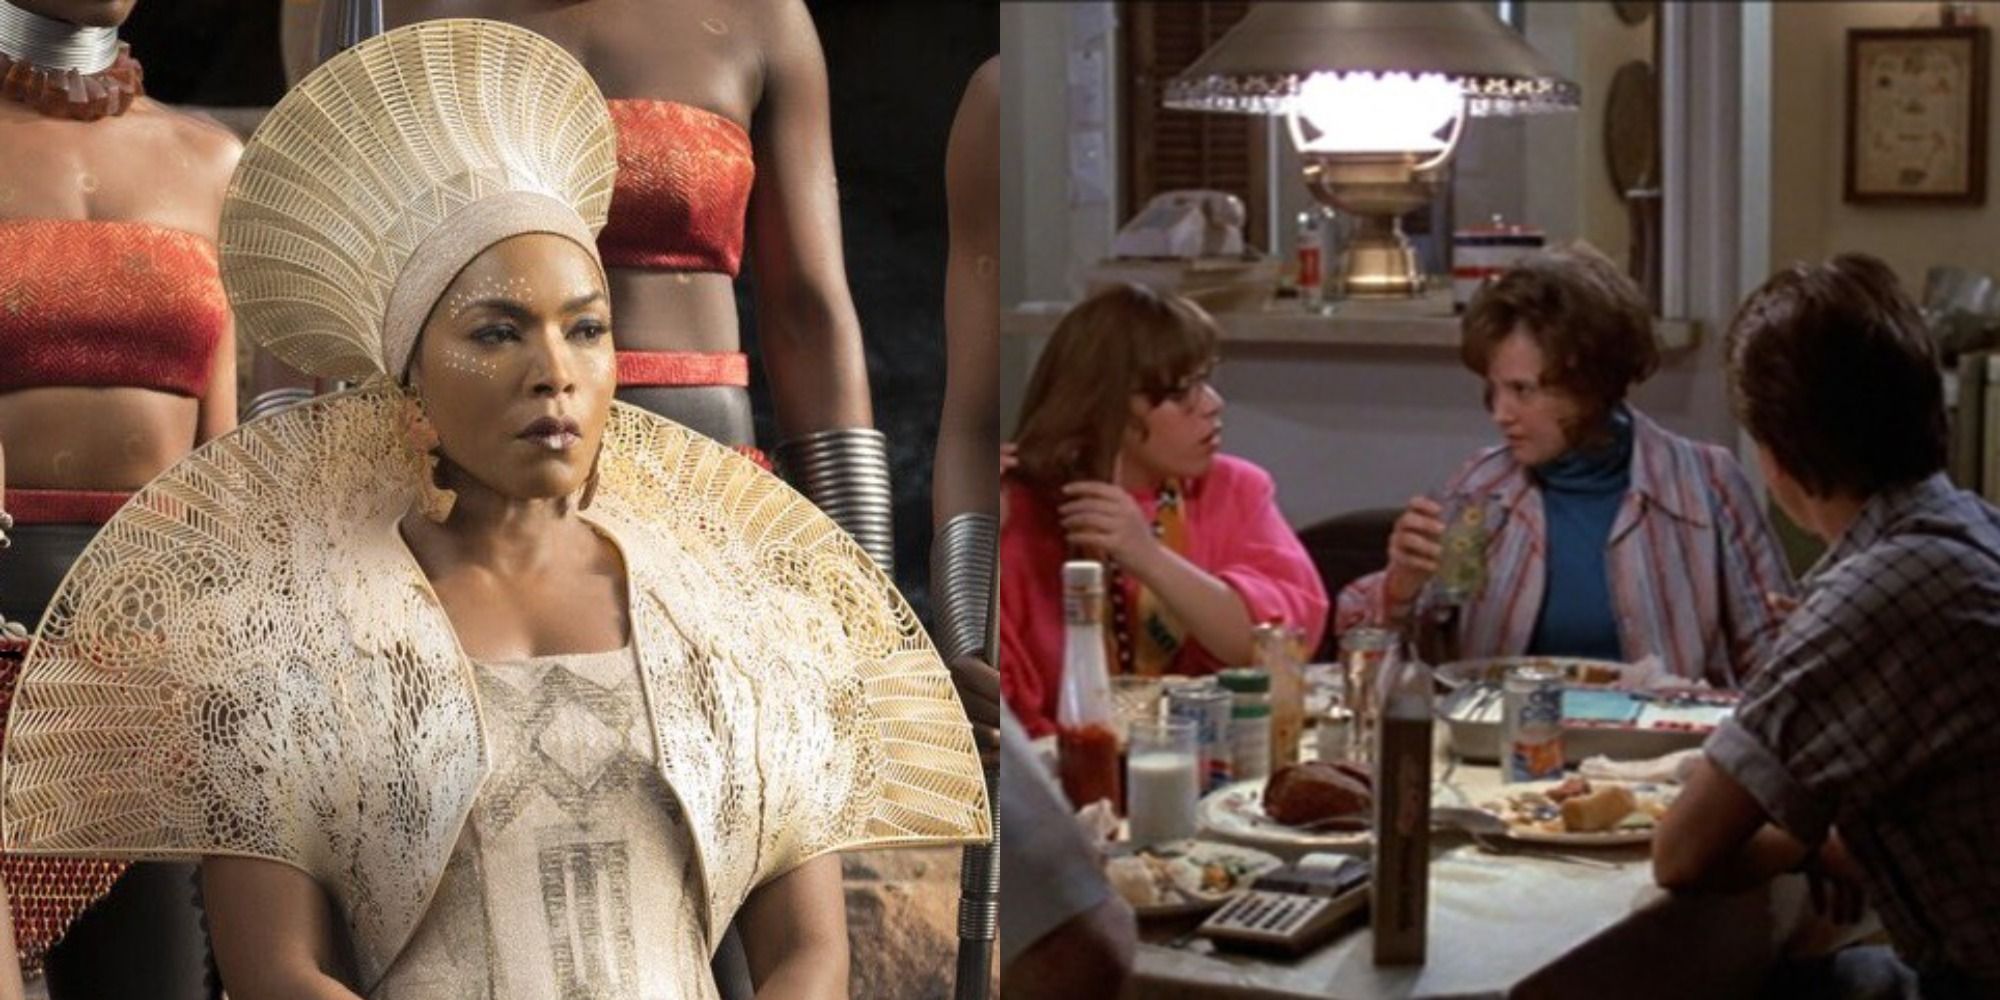 Image of the McFlys from Back to the Future next to an image of Ramonda from Black Panther.